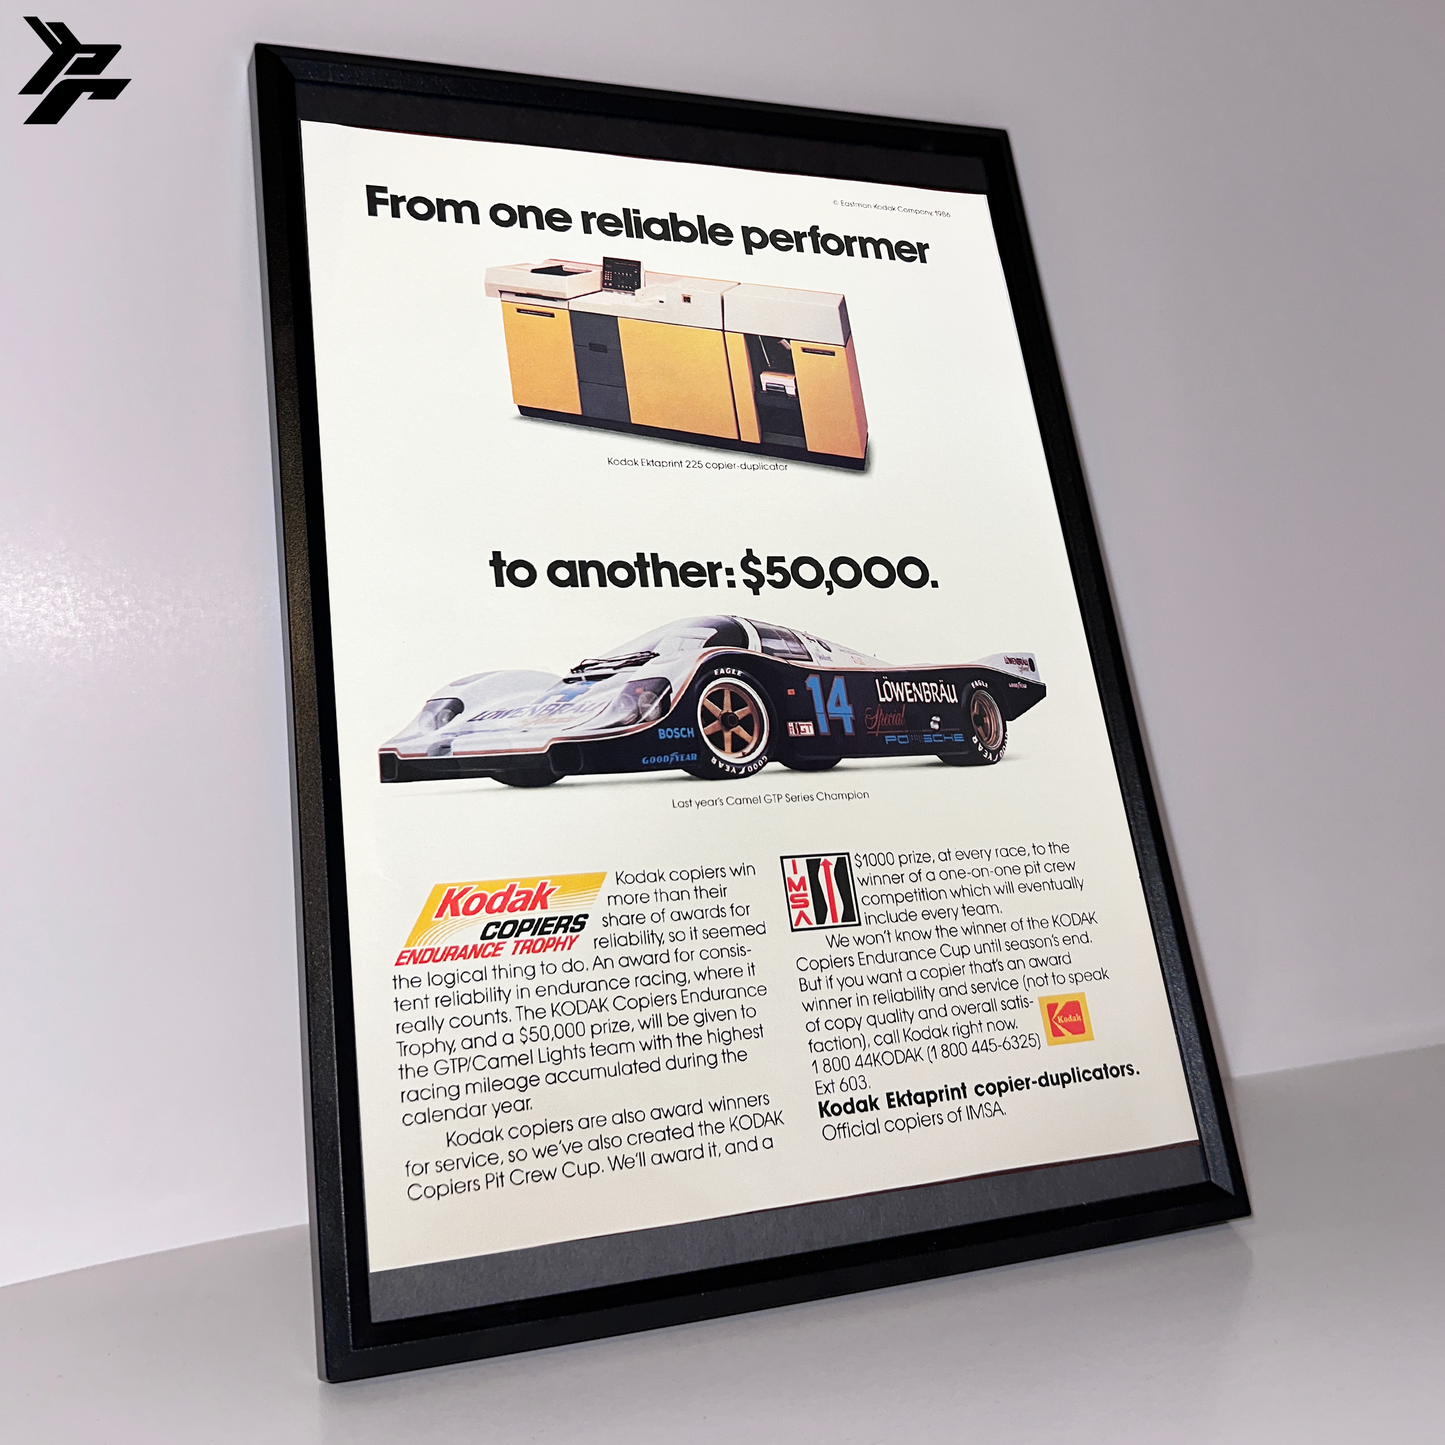 Porsche GTP reliable performer framed ad